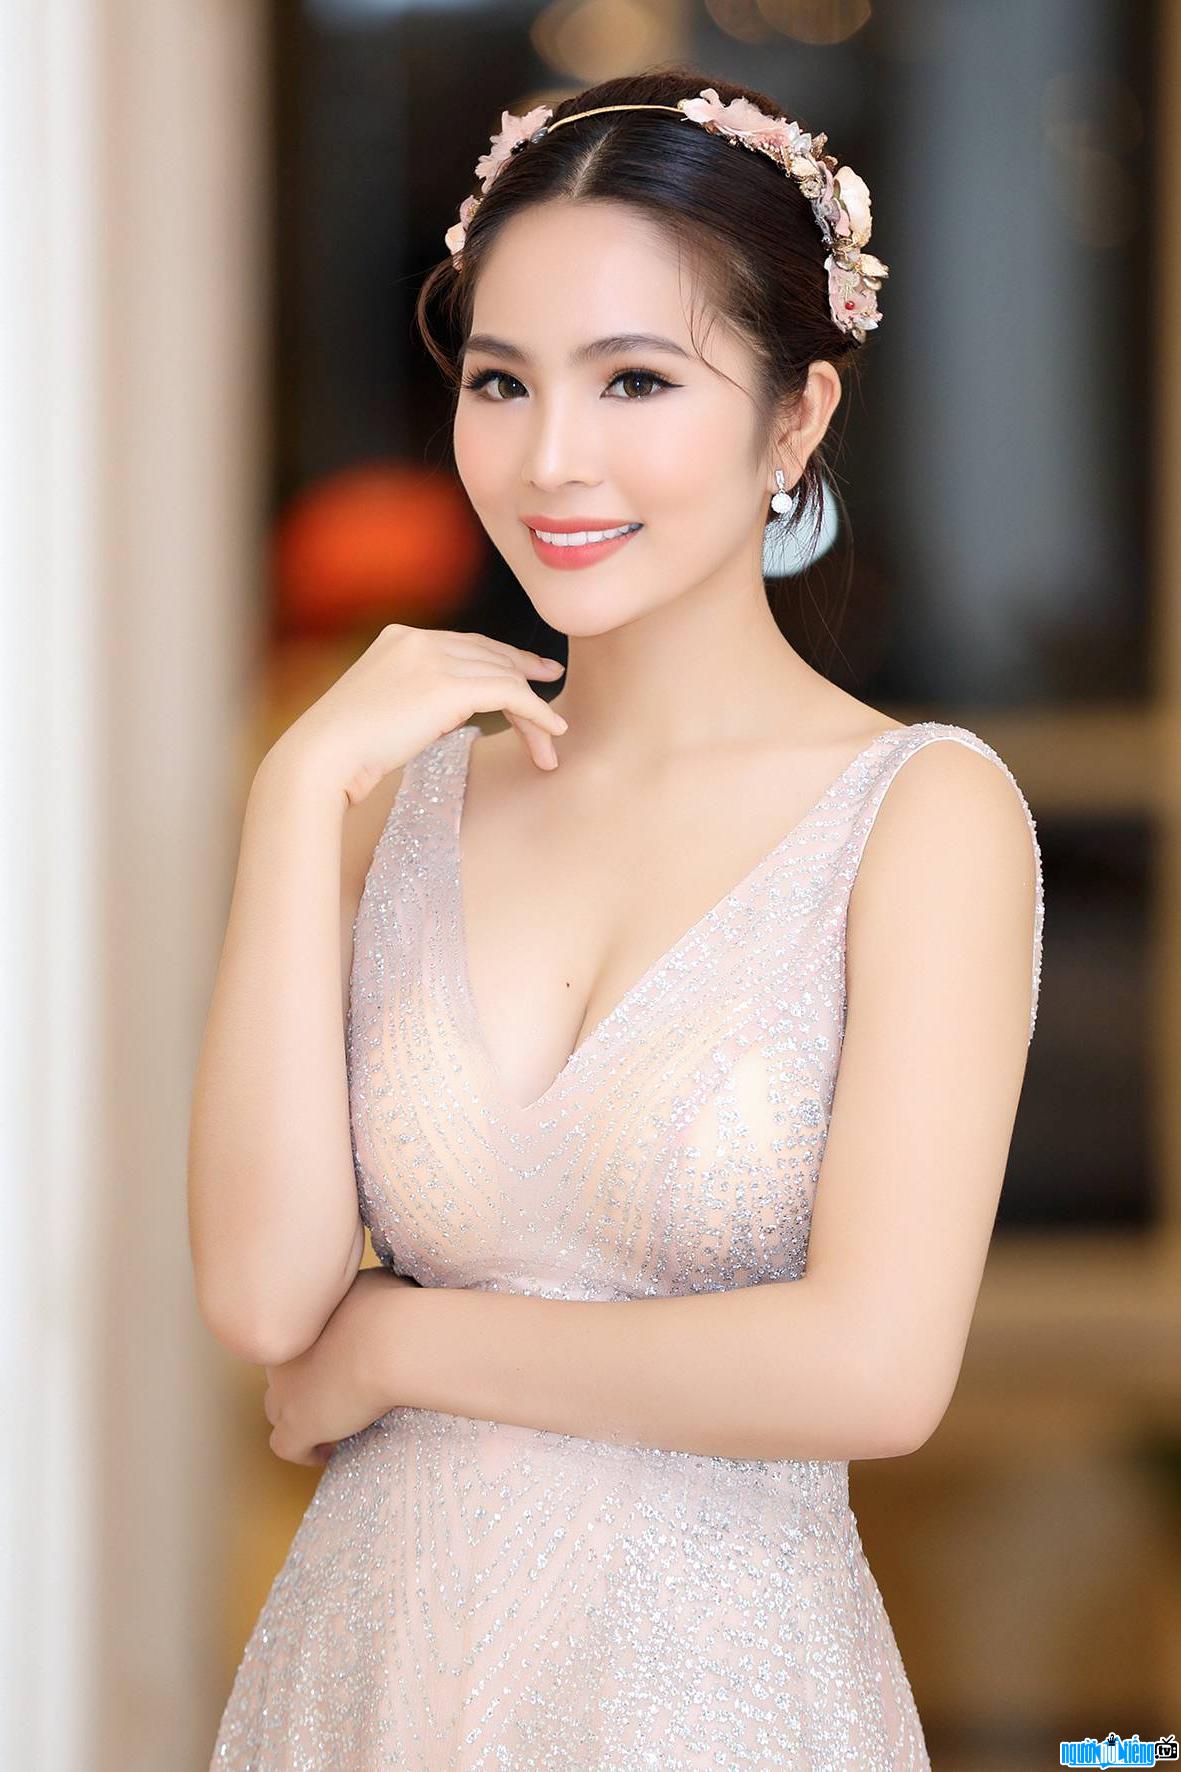 A picture of Miss Duong Kim Anh in a recent event